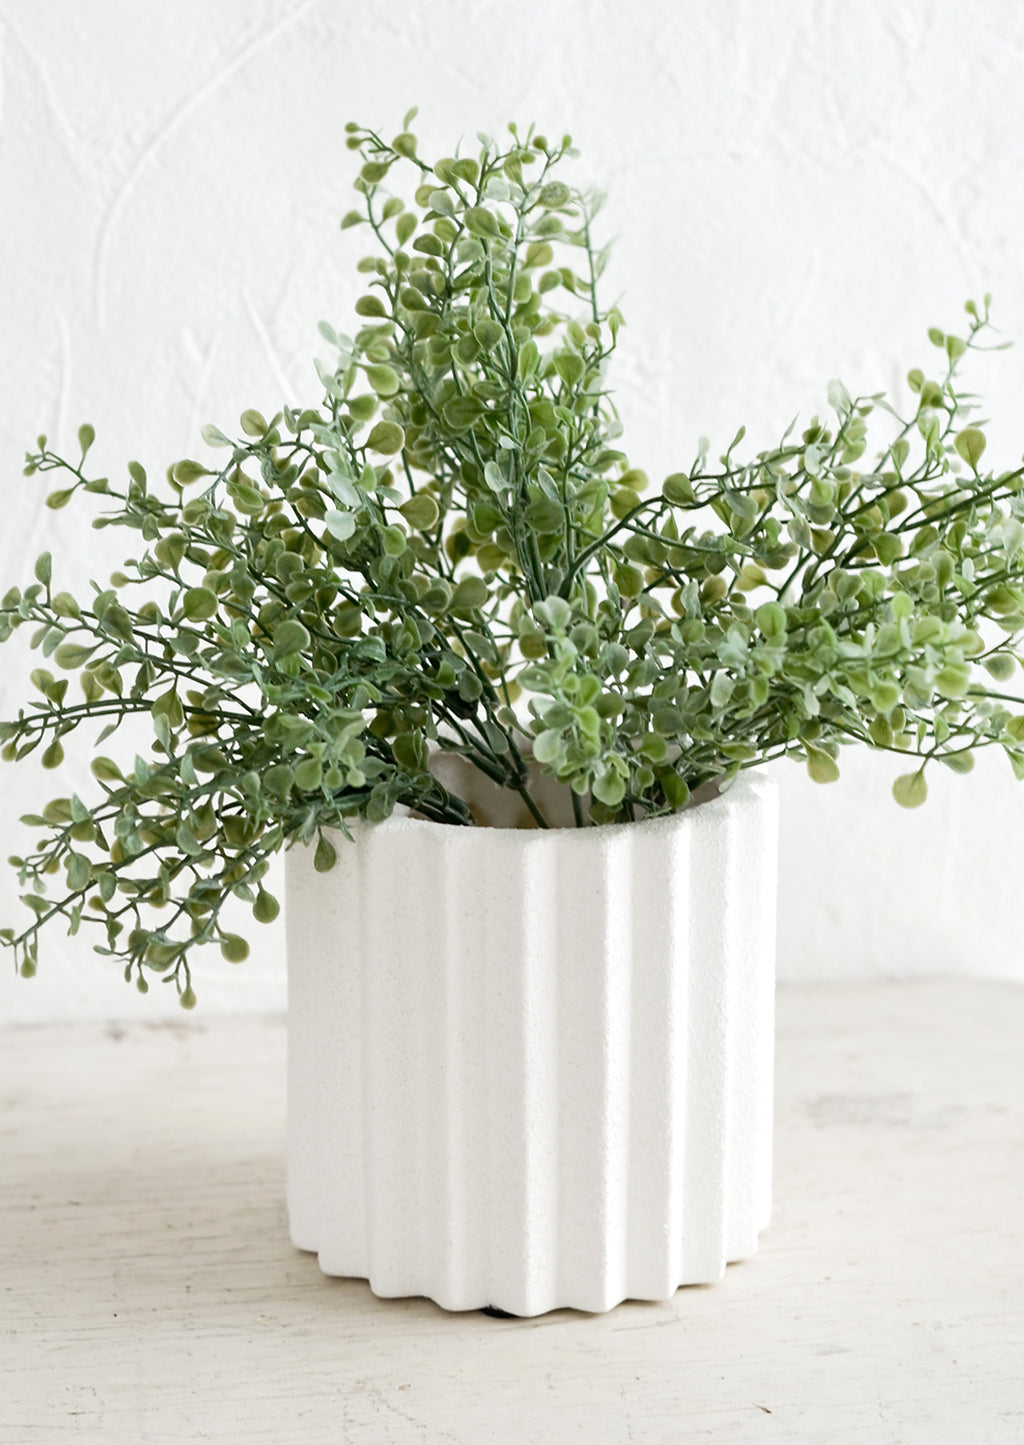 2: A geometric groove textured planter with plant.